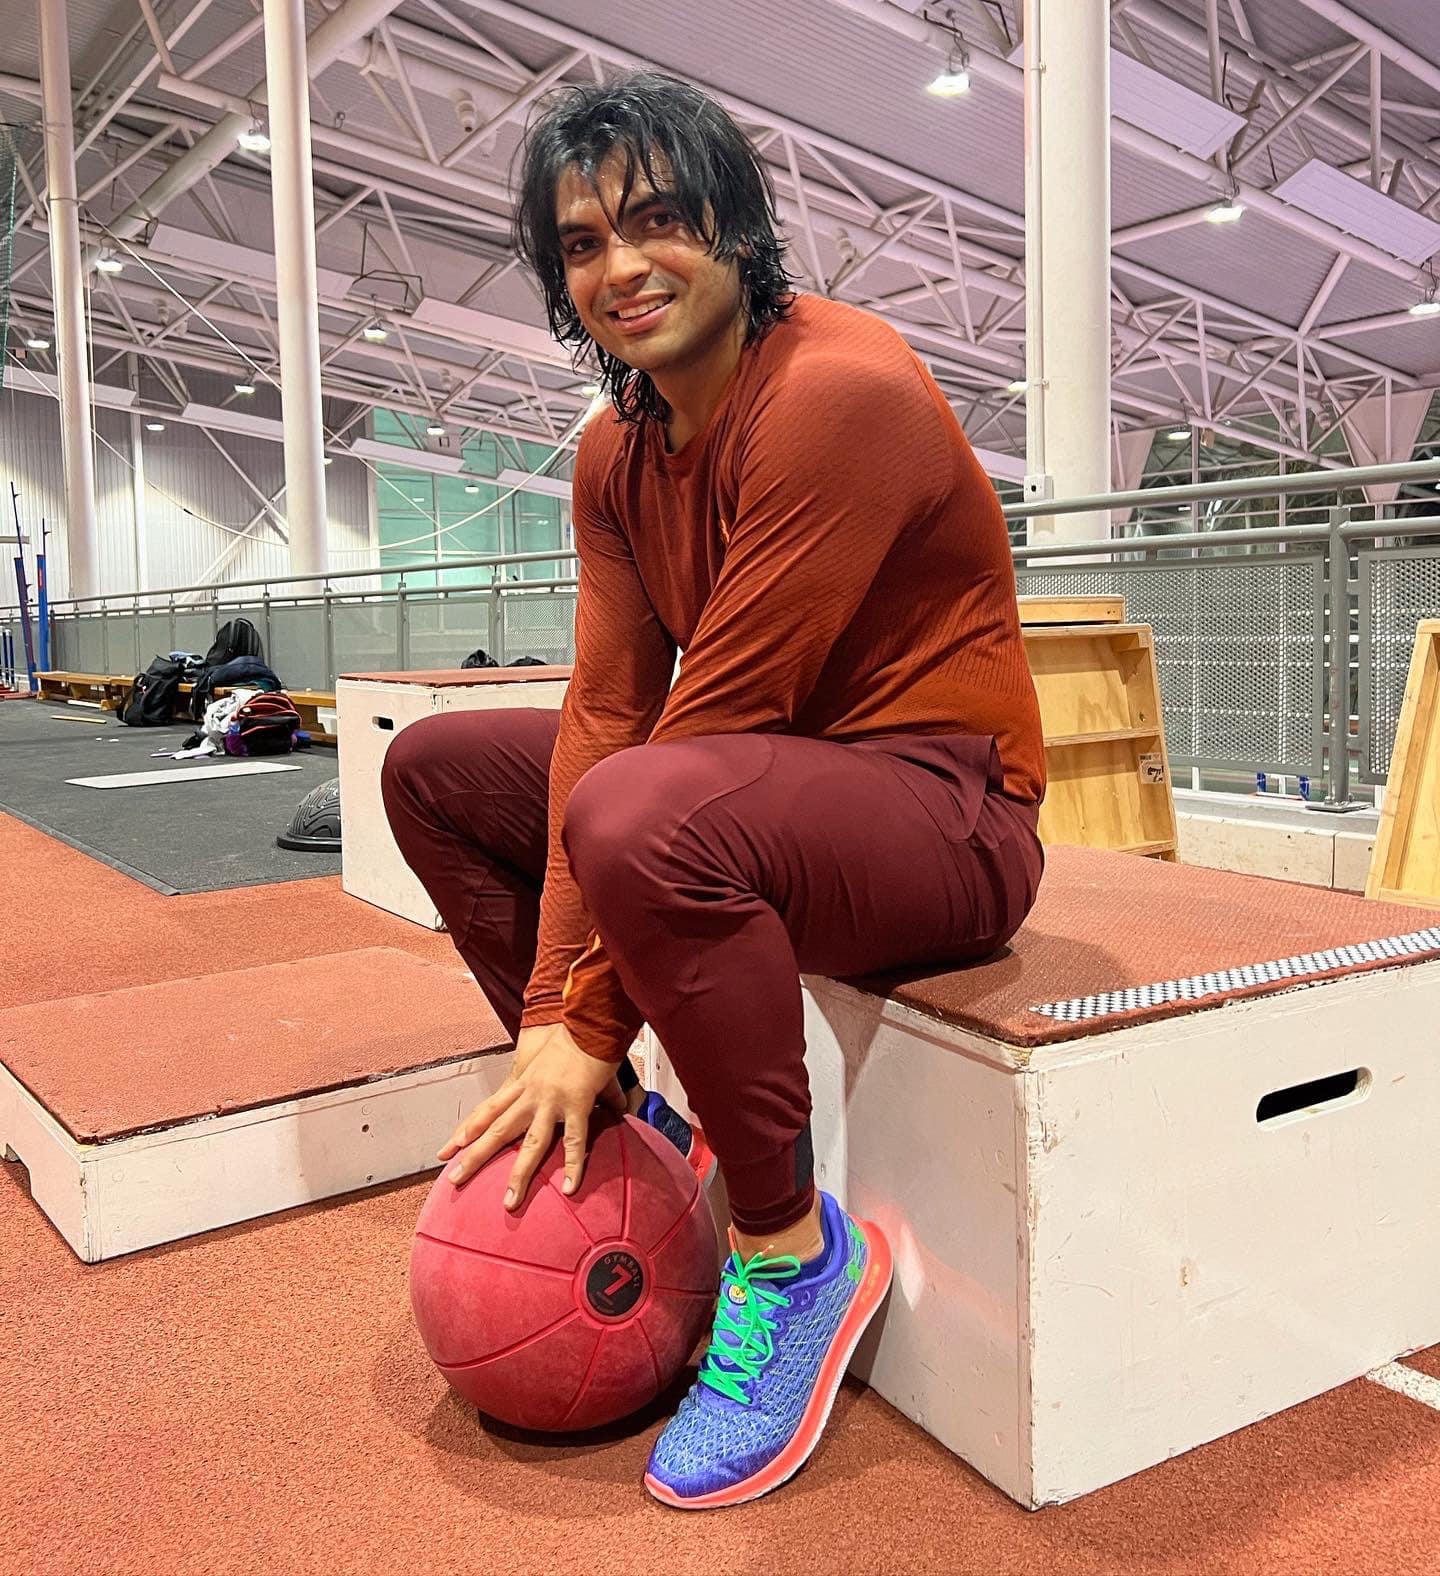 Neeraj Chopra, the second Indian to win a medal at World Athletics Championships